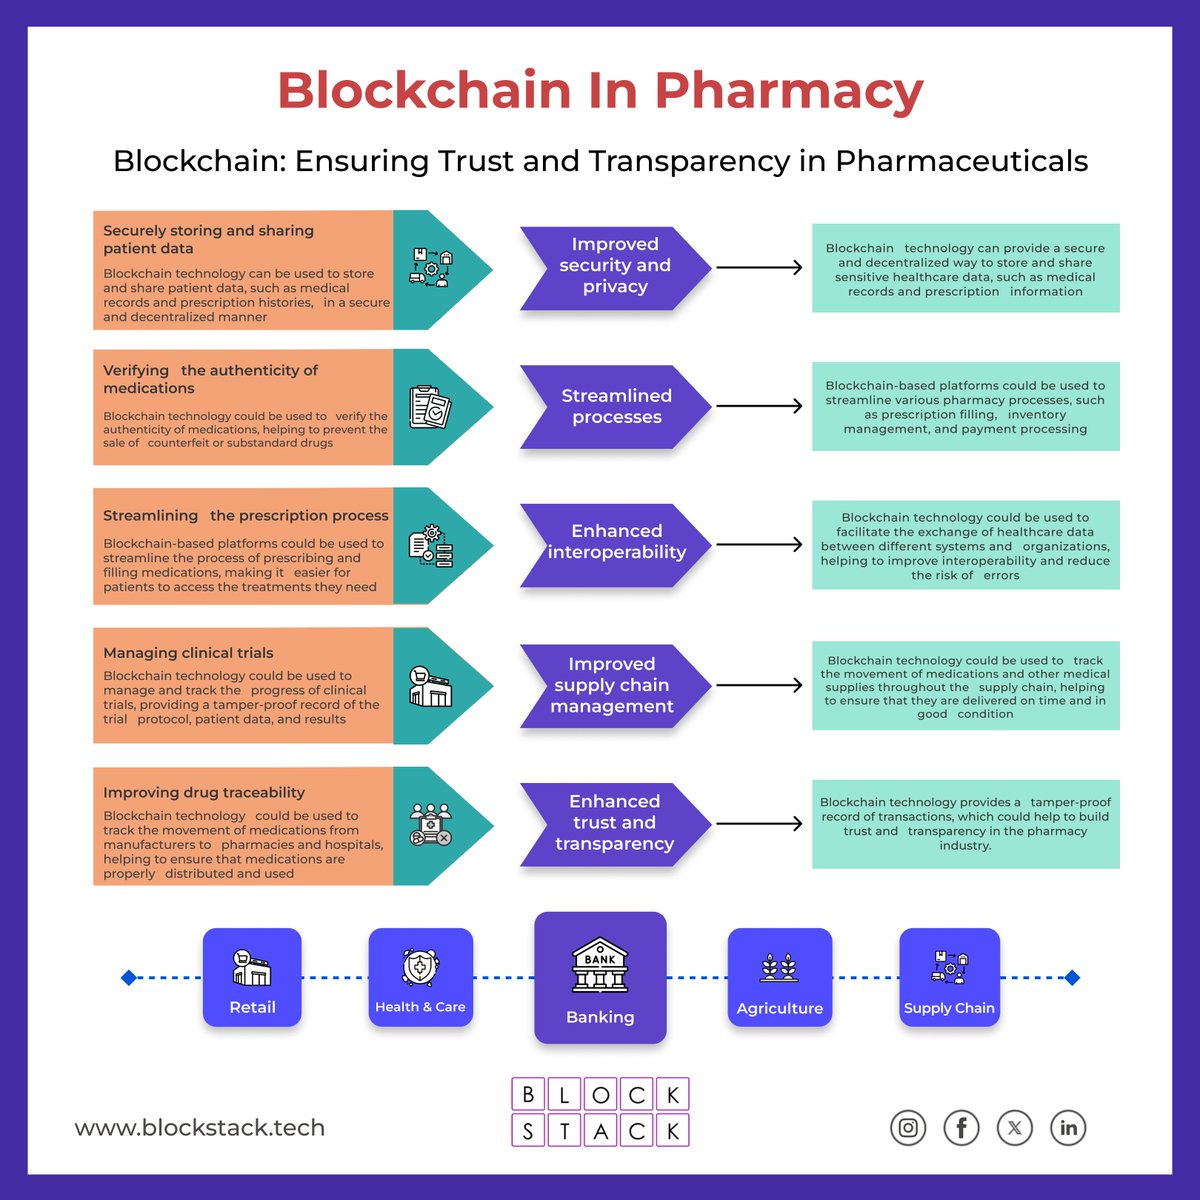 Revolutionizing pharmacy with Blockchain.

We at Block Stack are working towards elevating pharmacy standards with blockchain: Better security, faster processes, and foolproof drug tracking.

Explore Block Stack's Blockchain services here: blockstack.tech/blockchain/